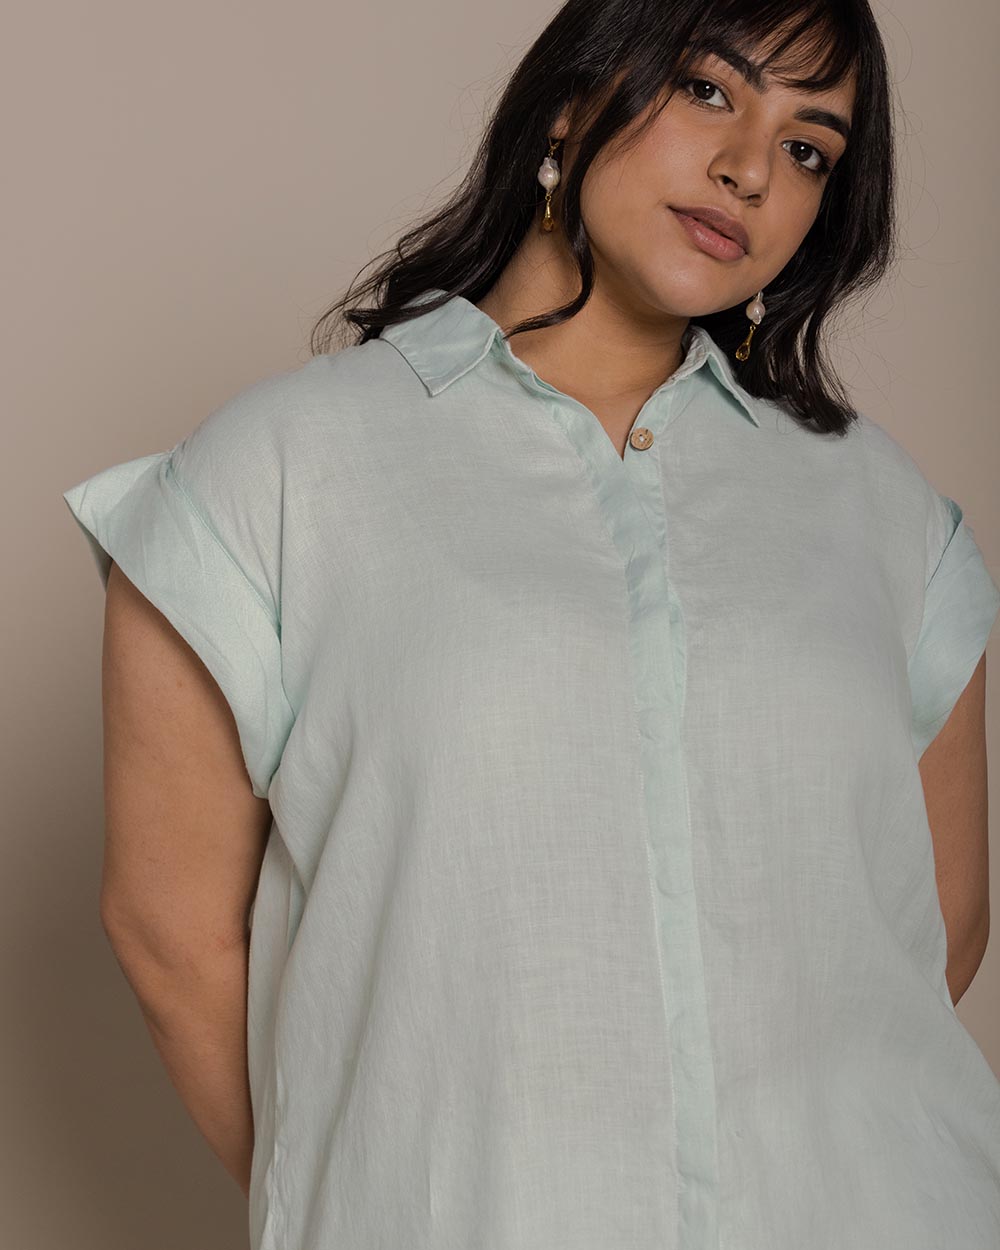 Chasing Daydreams Shirt - Sage Mint-OOS at Kamakhyaa by Reistor. This item is Green, Hemp, Natural, Office Wear, Solids, T-Shirts, Tops, Tunic Tops, Womenswear